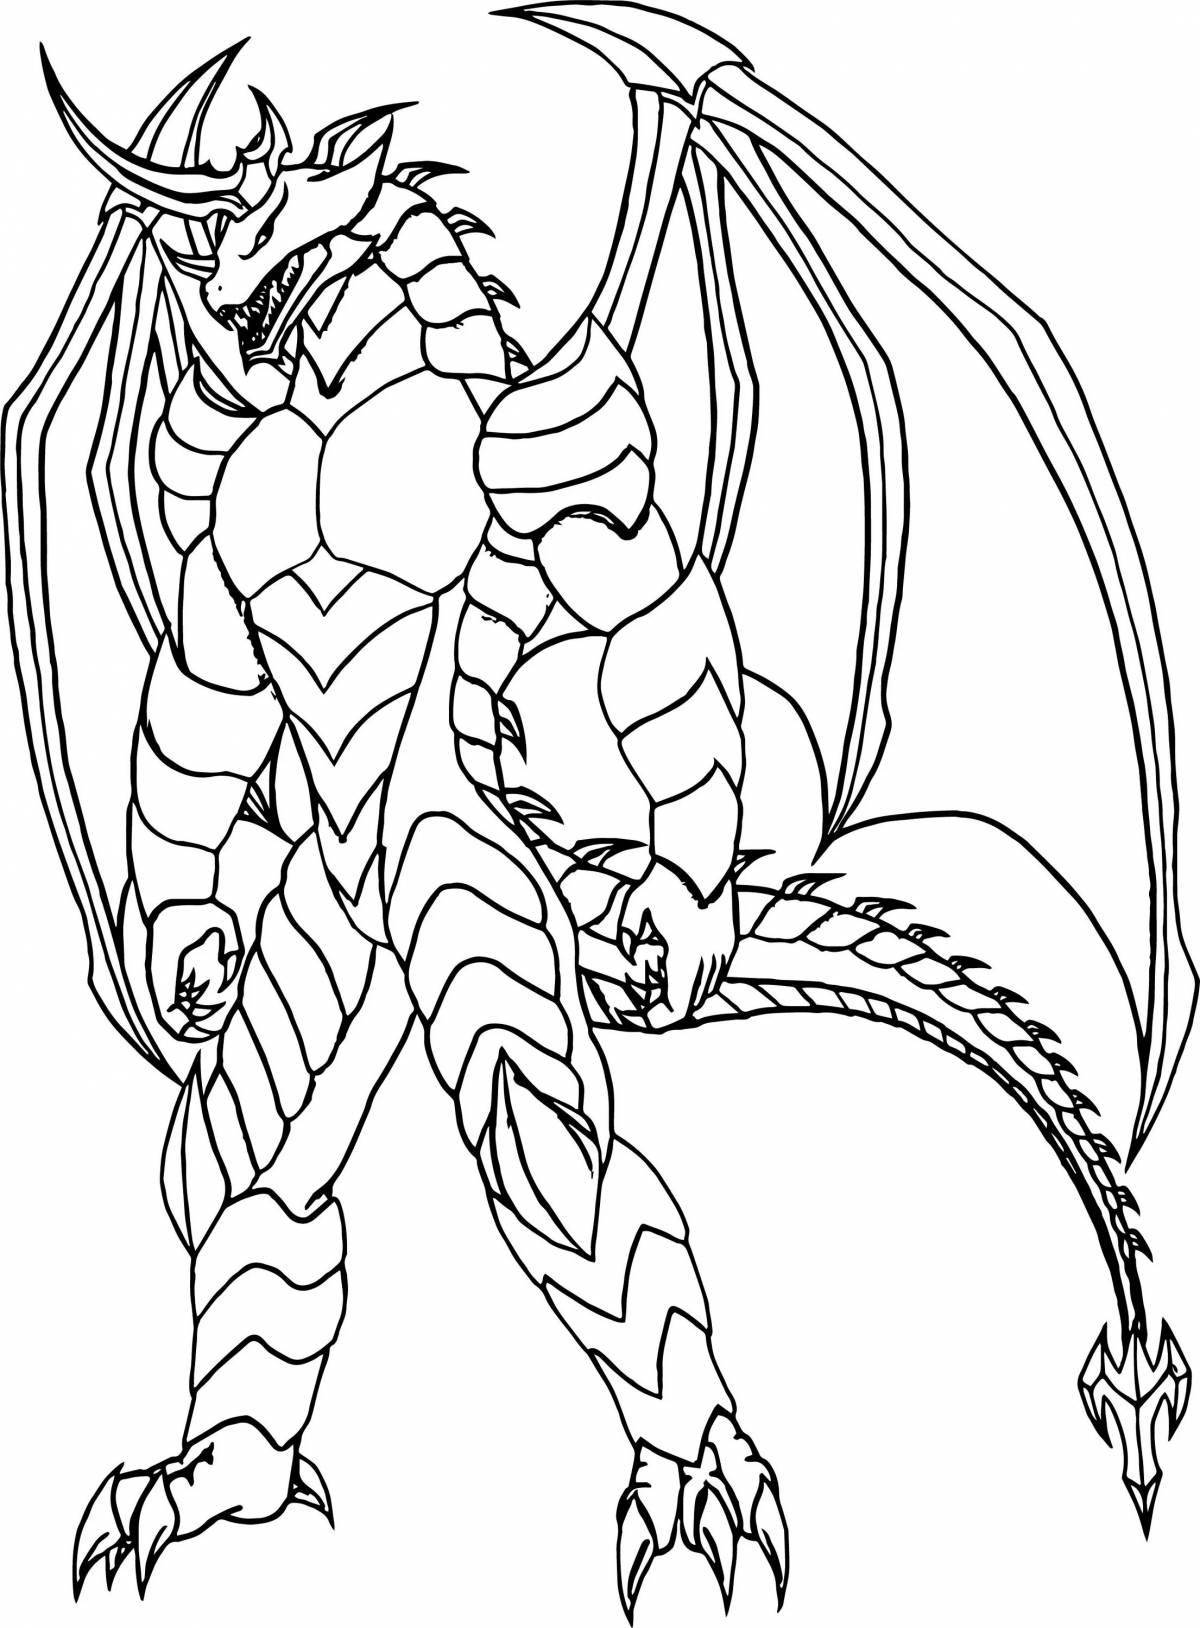 Dragon Robot Spectacular Coloring Page